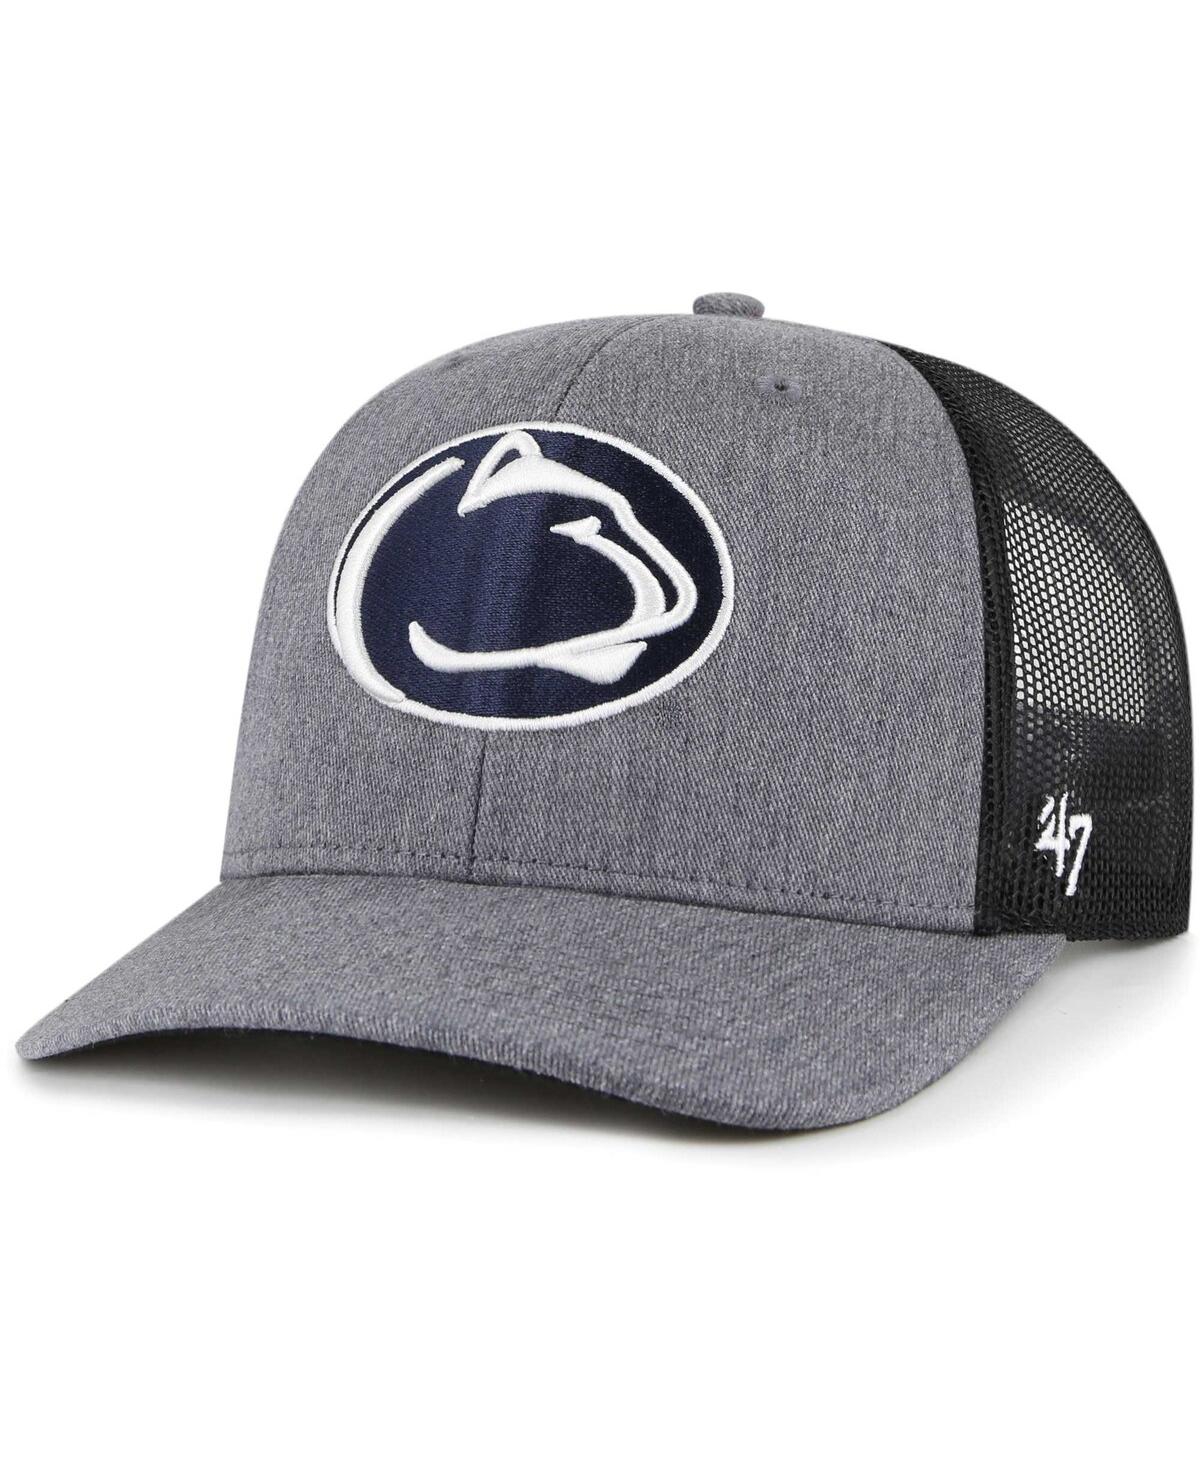 47 Brand Men's ' Charcoal Penn State Nittany Lions Carbon Trucker Adjustable Hat